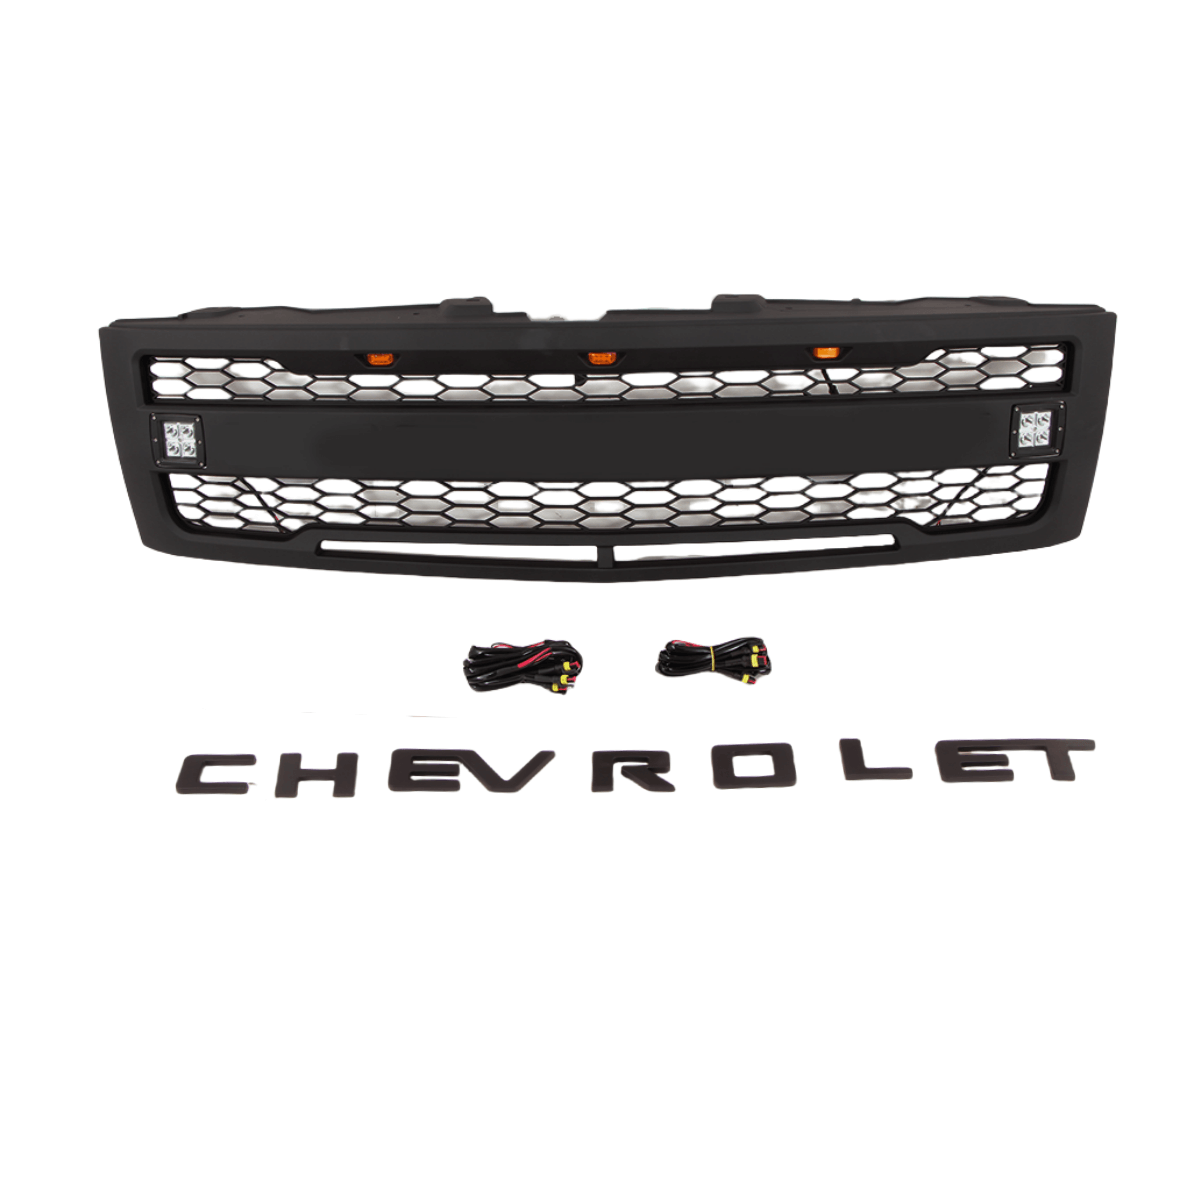 {WildWell}{ Chevrolet Grille}-{ Chevrolet Silverado Grille 2007-2013/4}-Front